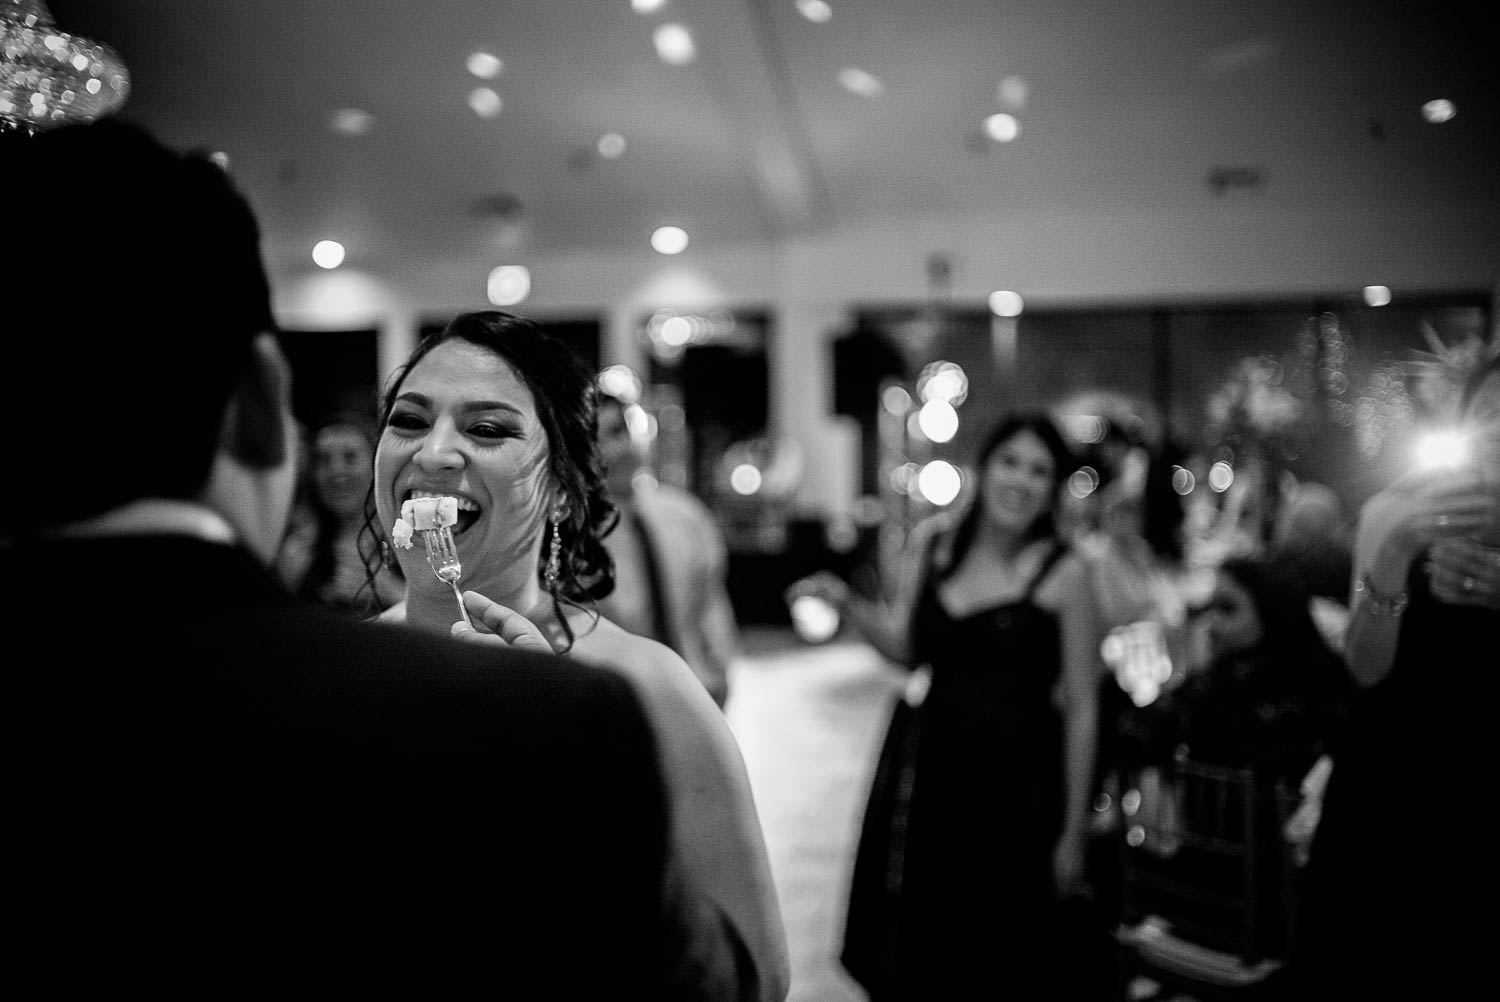 Groom feeds cake to bride during cutting the cake at Granberry Hills Wedding, Philip Thomas Photography